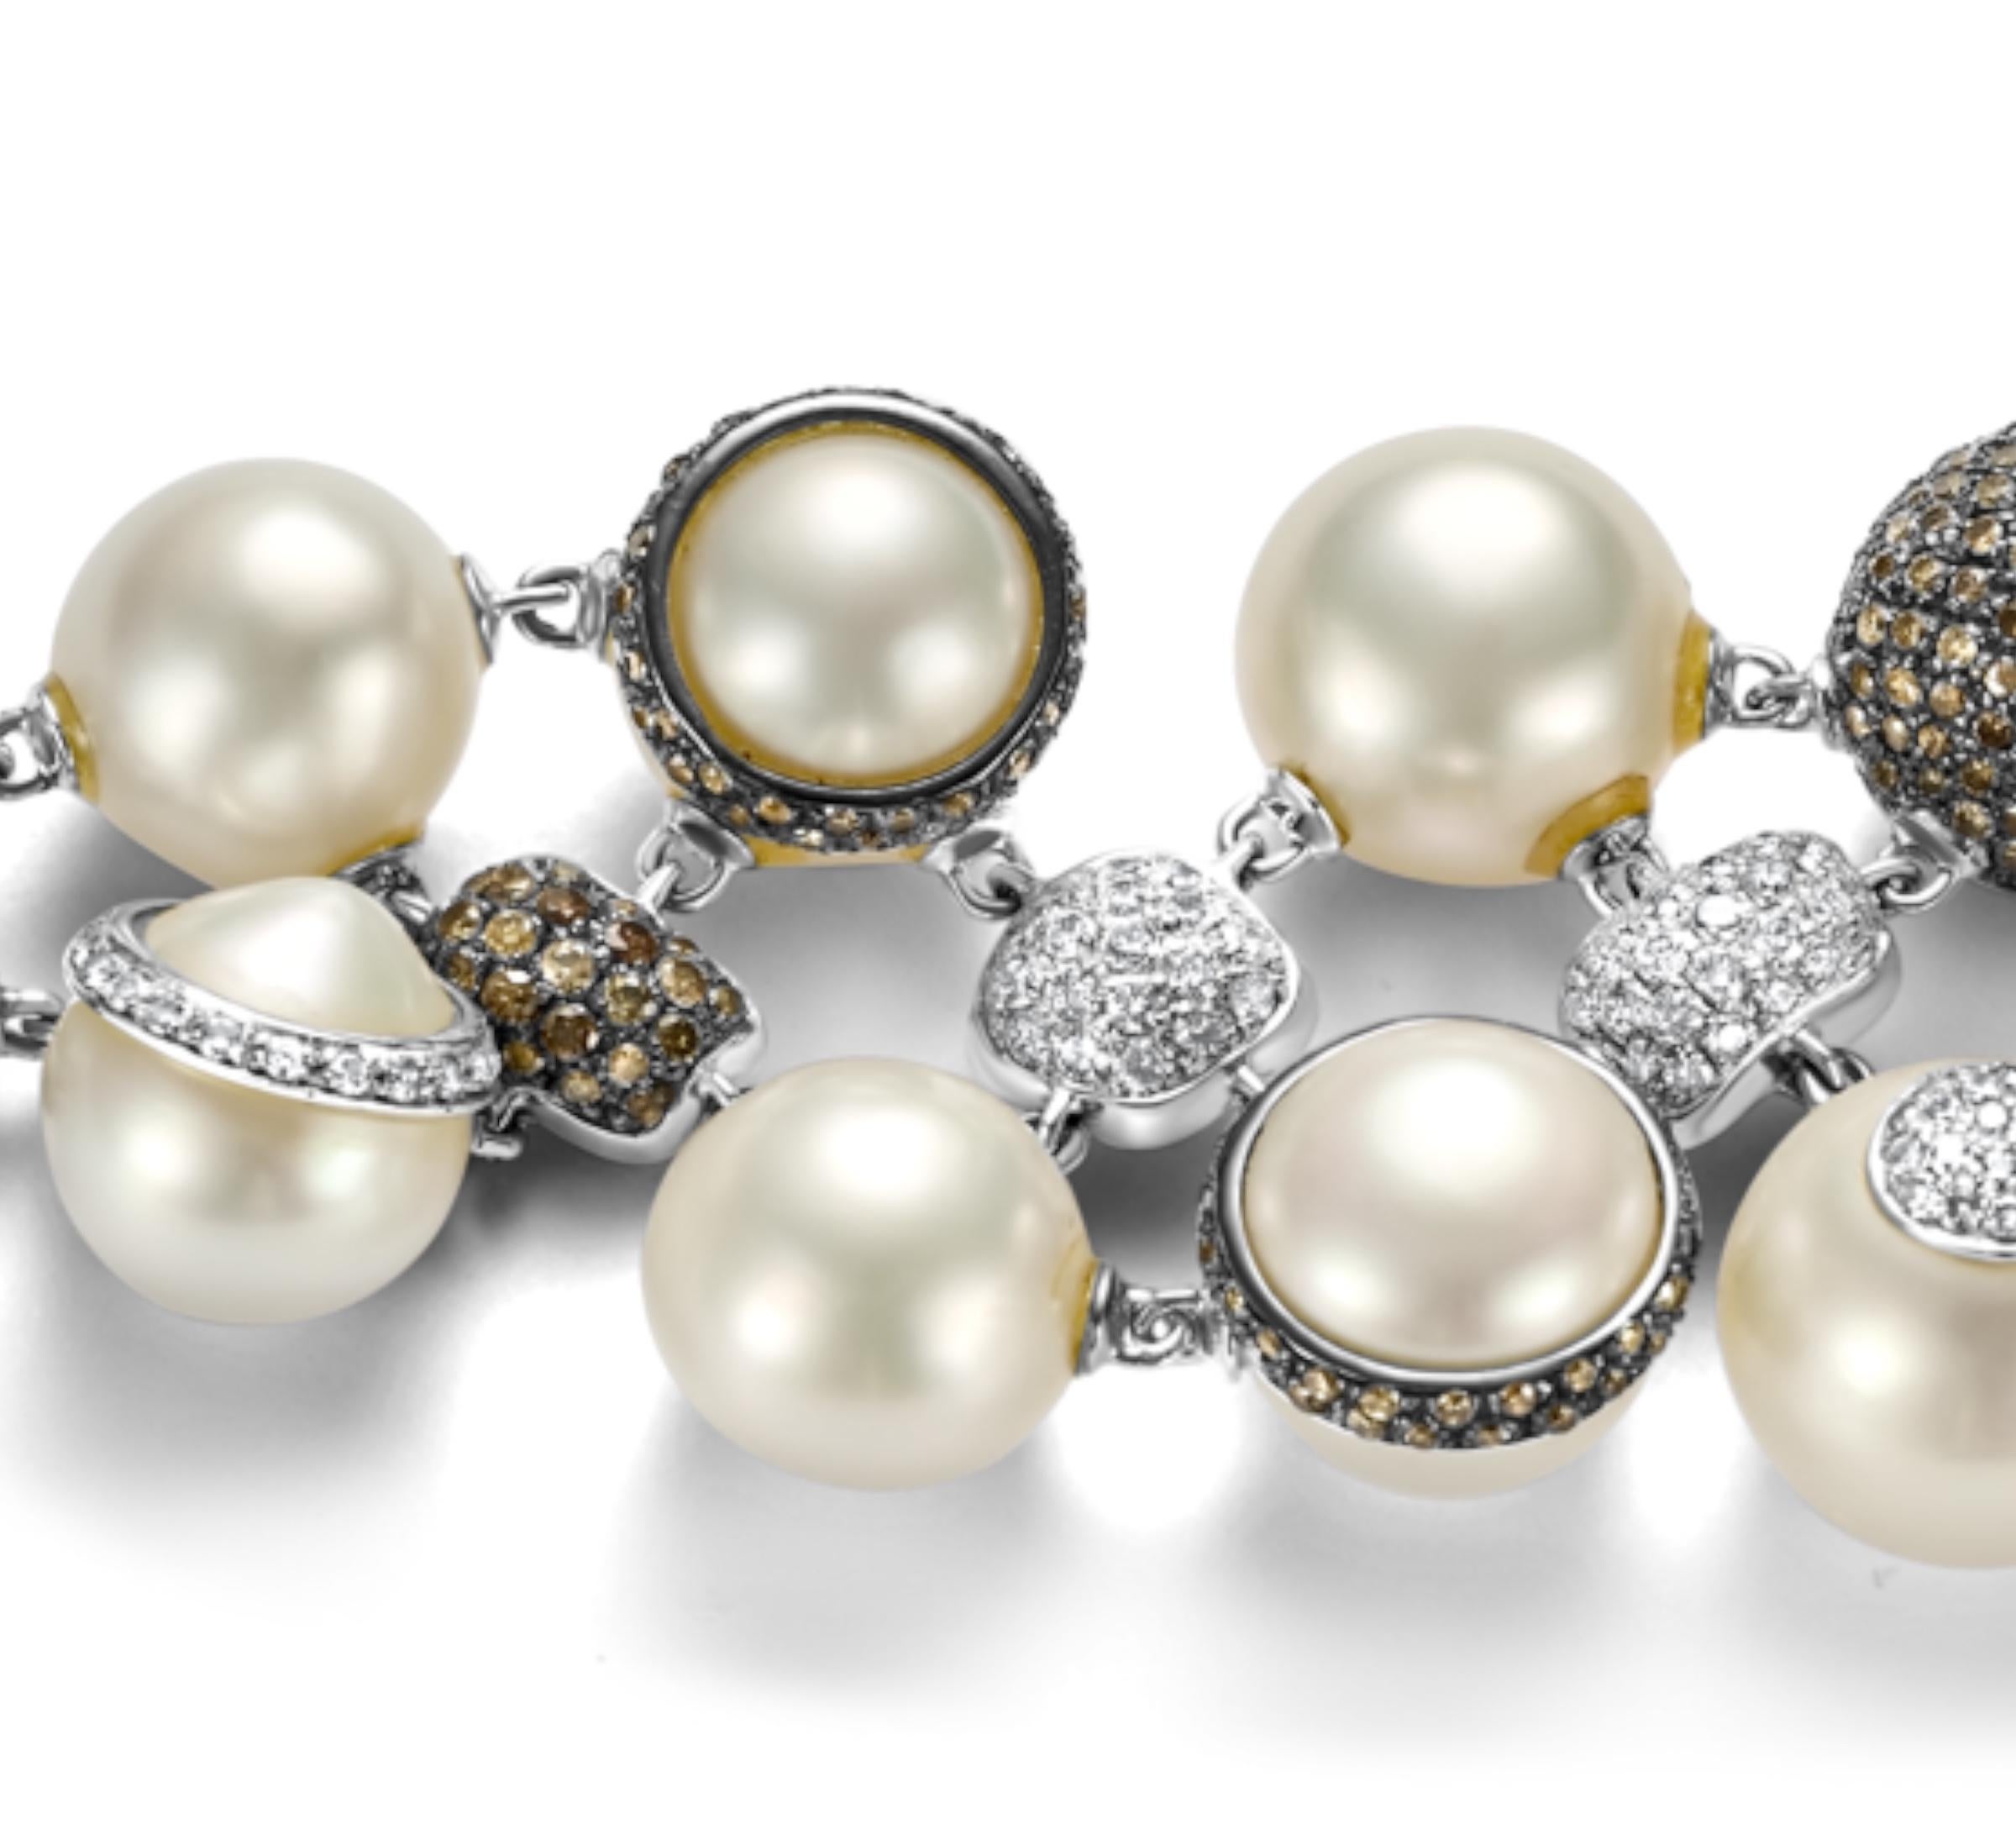 18kt White Gold Bracelet 12.6ct White & Cognac Diamonds Pearl Has Matching Ring For Sale 6